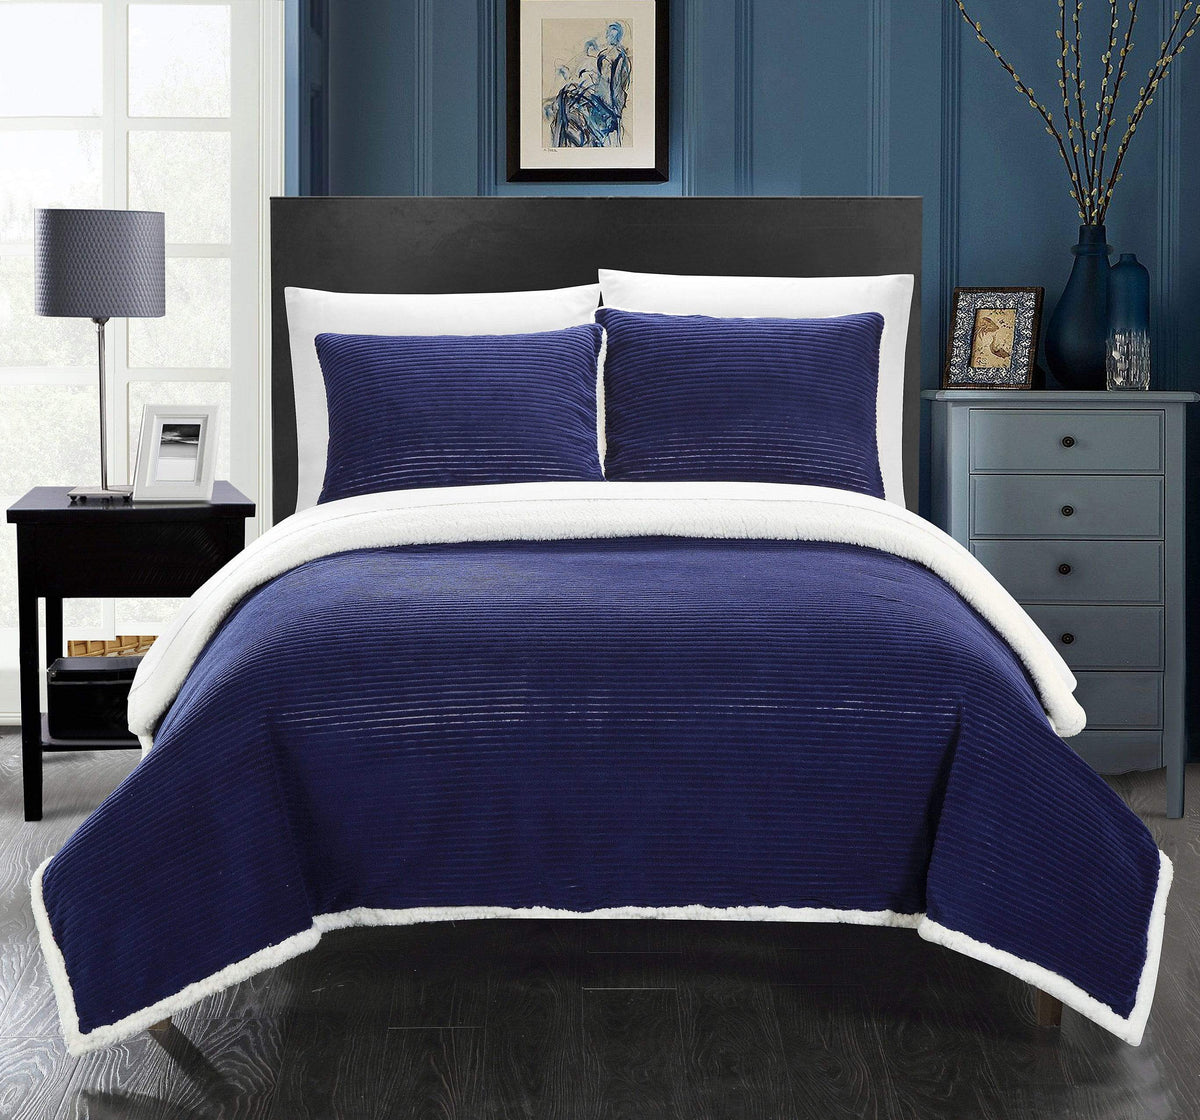 Chic Home Lancy Blanket 3 Piece Set Ultra Plush Micro Mink Sherpa Lined Textured Bedding Navy